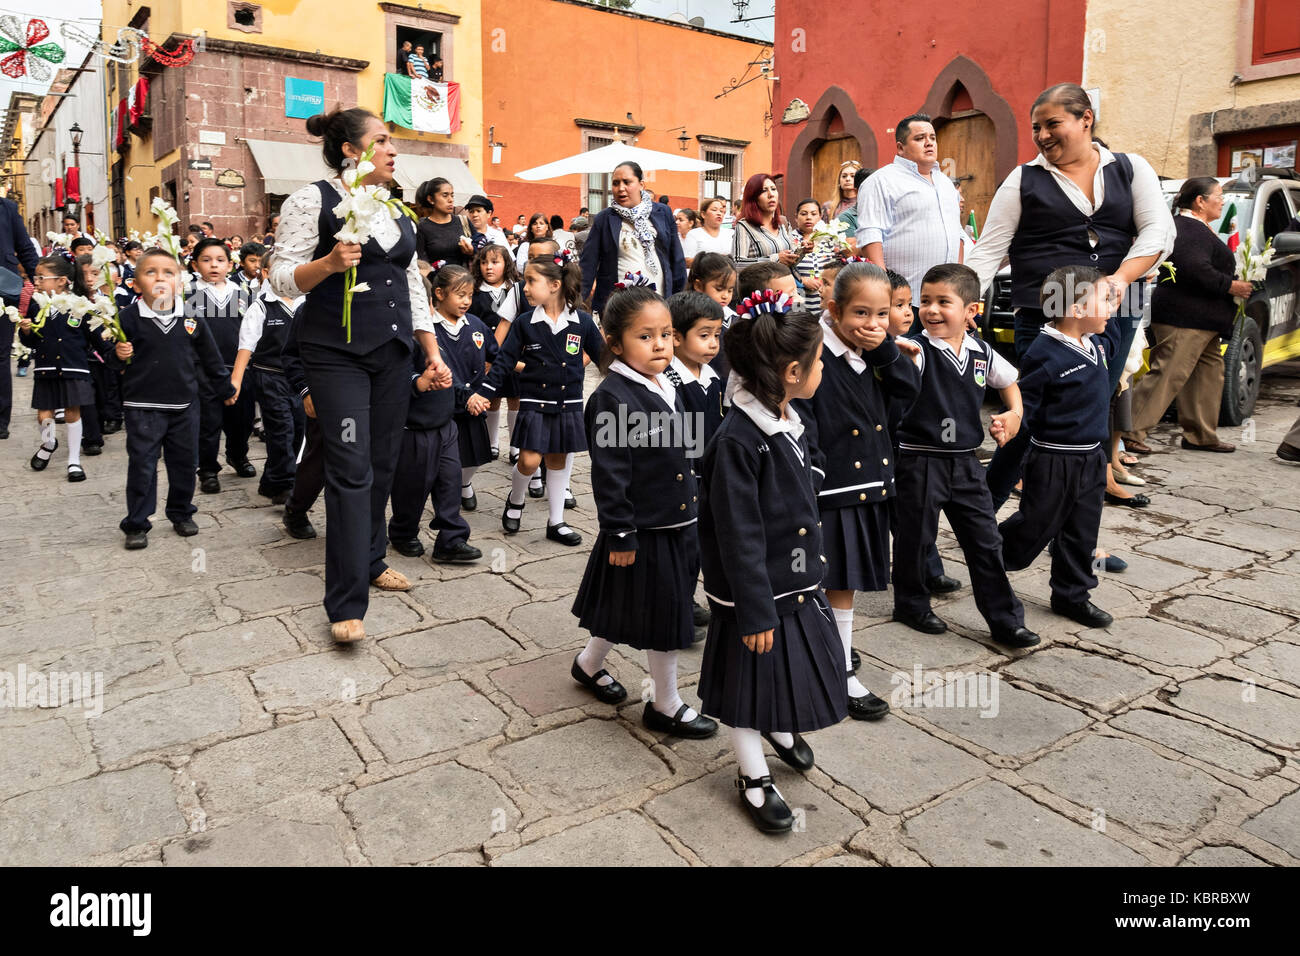 School children hold a procession to the Parroquia de San Miguel Arcangel church during the week long fiesta of the patron saint Saint Michael September 26, 2017 in San Miguel de Allende, Mexico. Stock Photo